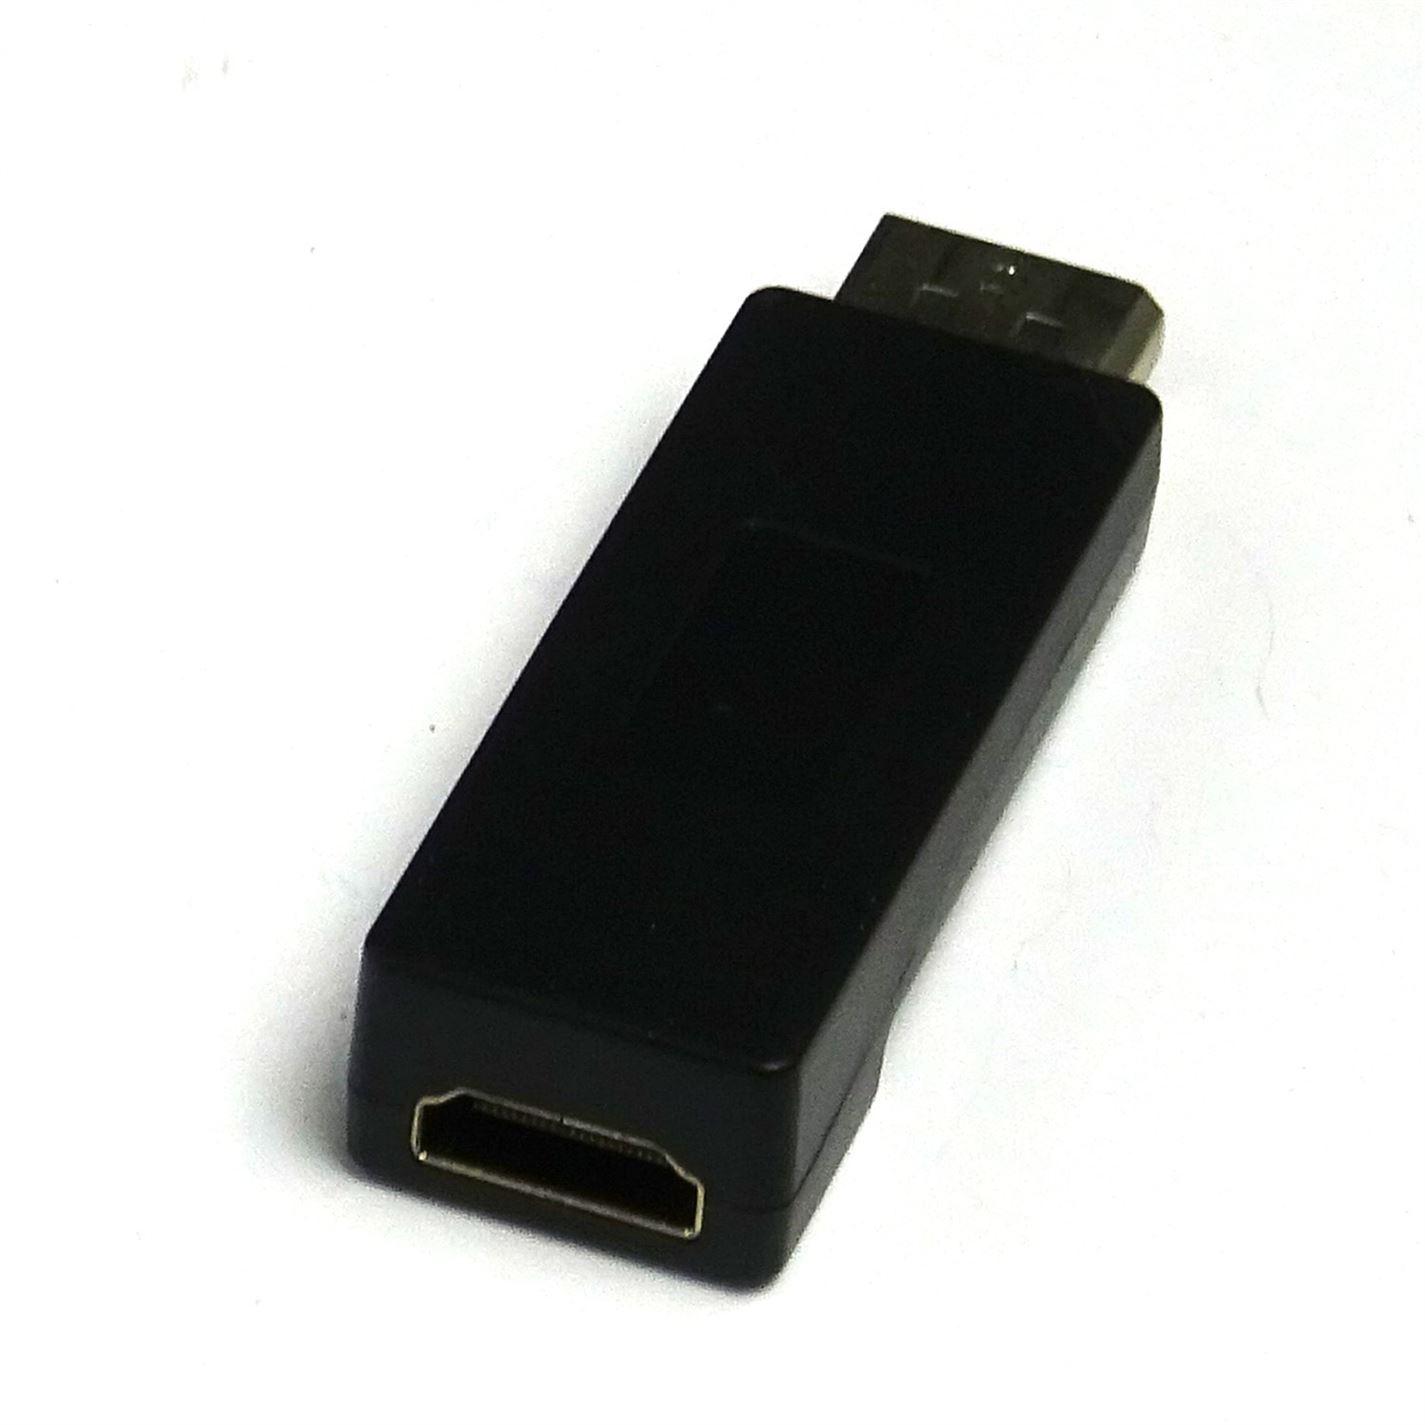 Display Port To HDMI Converter Adapter Display Port Male To HDMI Female Adaptor - UK Seller